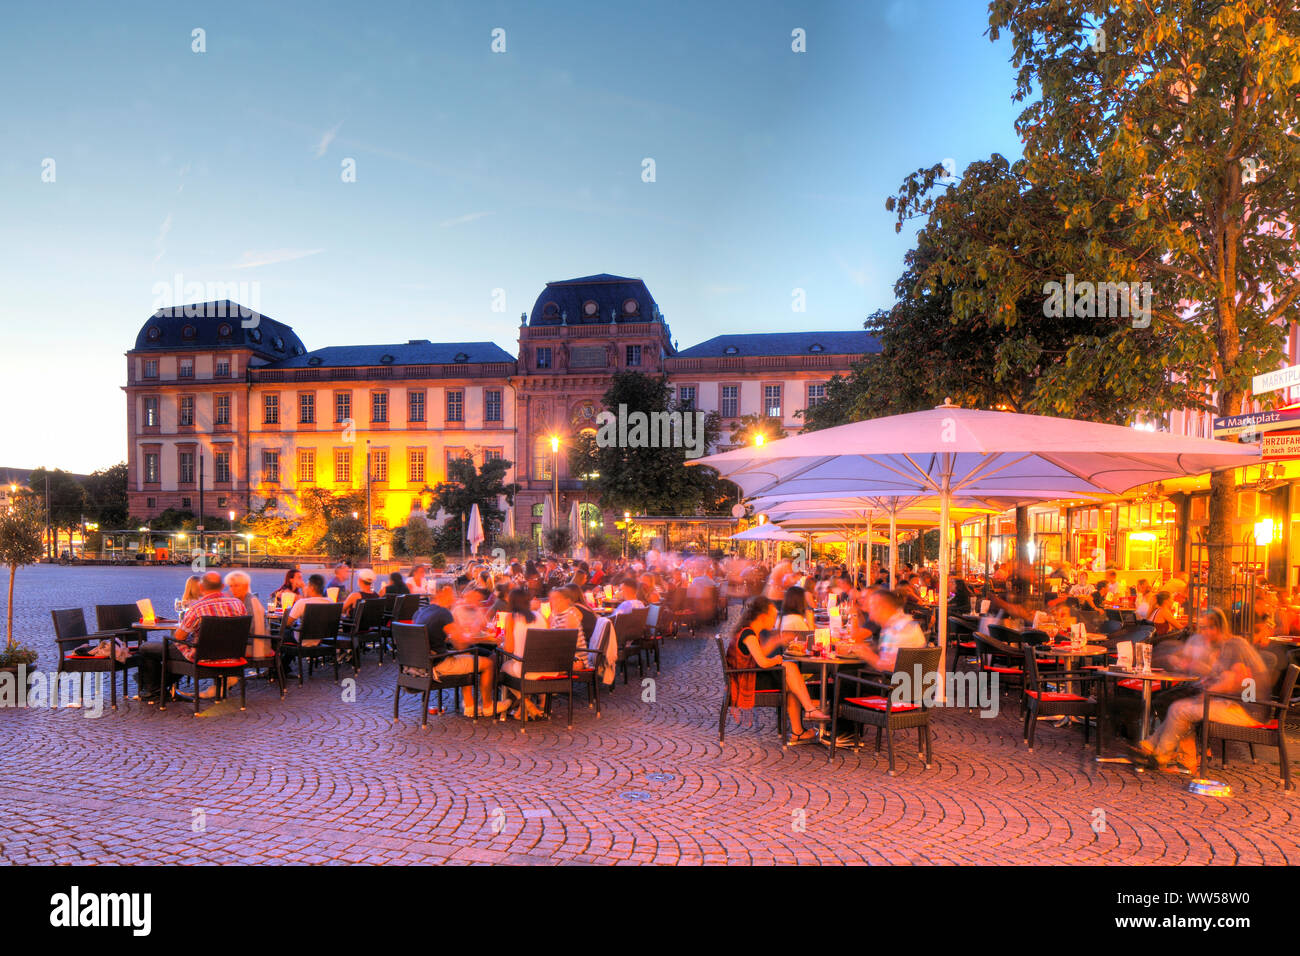 Market square with Darmstadt castle, today part of the University of Technology of Darmstadt, TU Darmstadt, at dusk, Darmstadt, Hesse, Germany, Europe Stock Photo